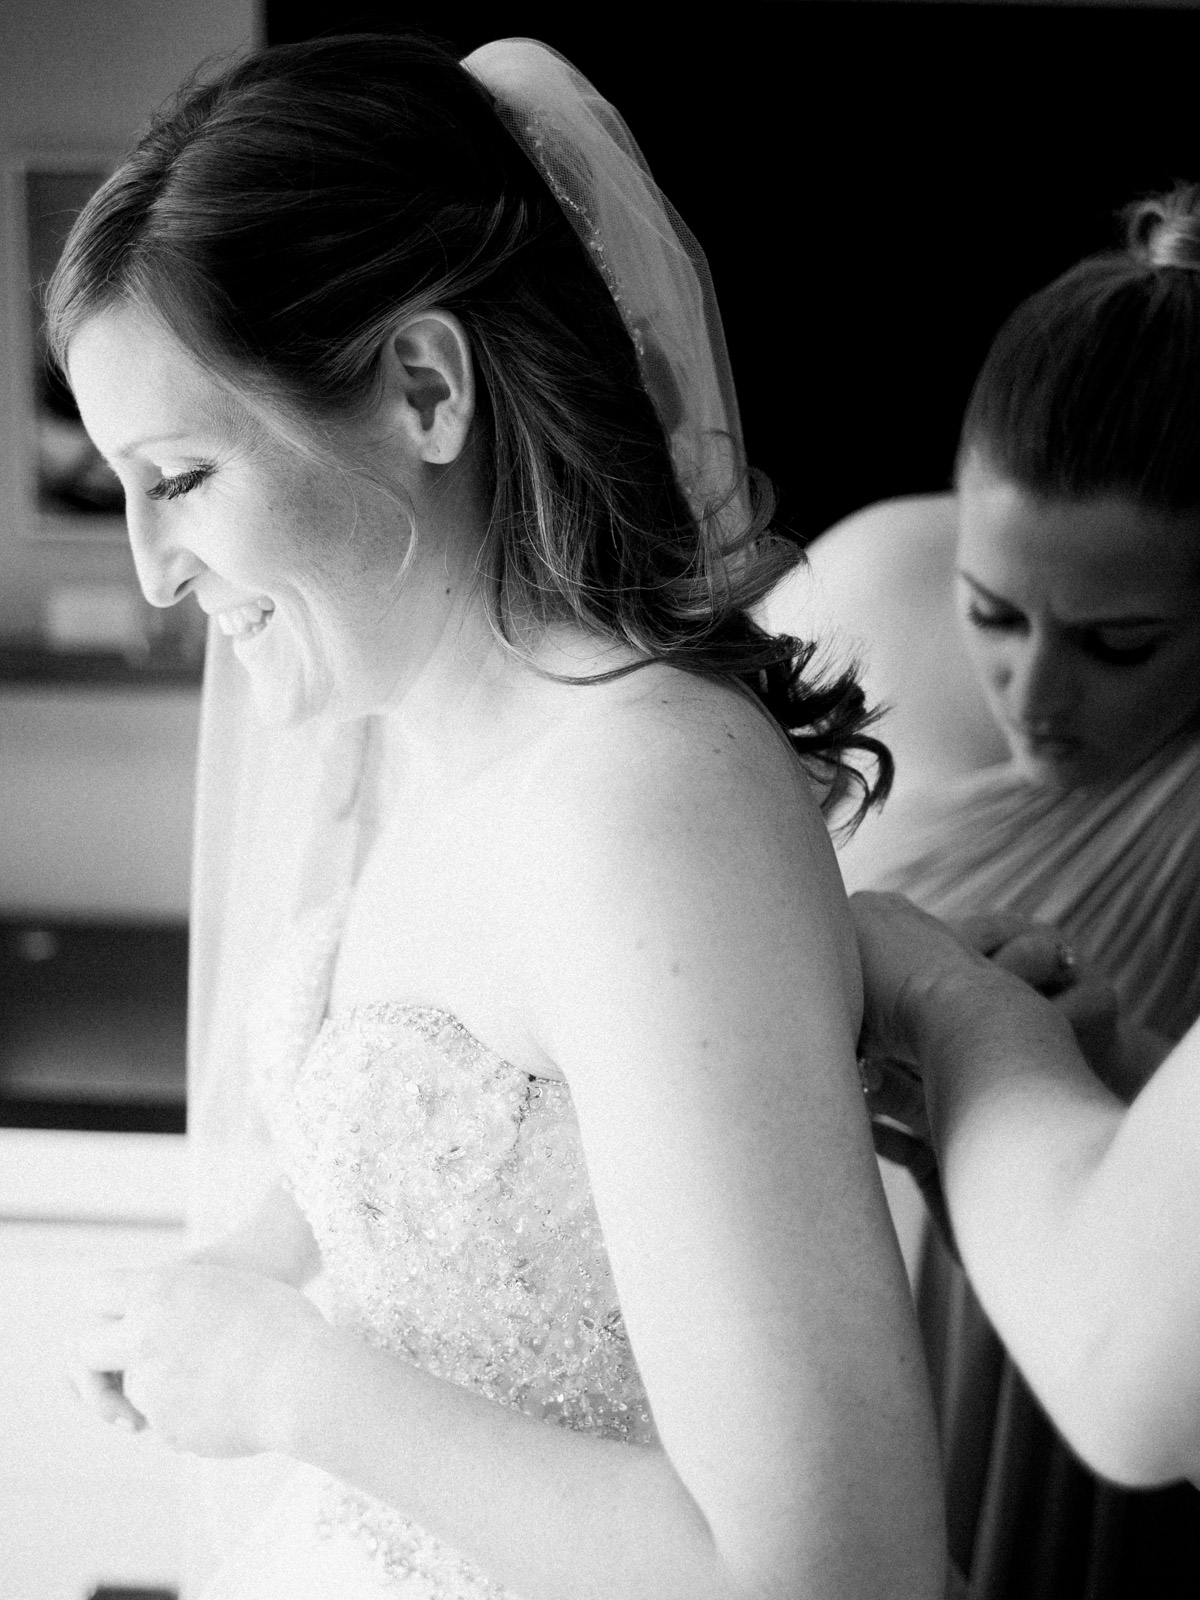 Bride is excited about wedding day as she gets dressed